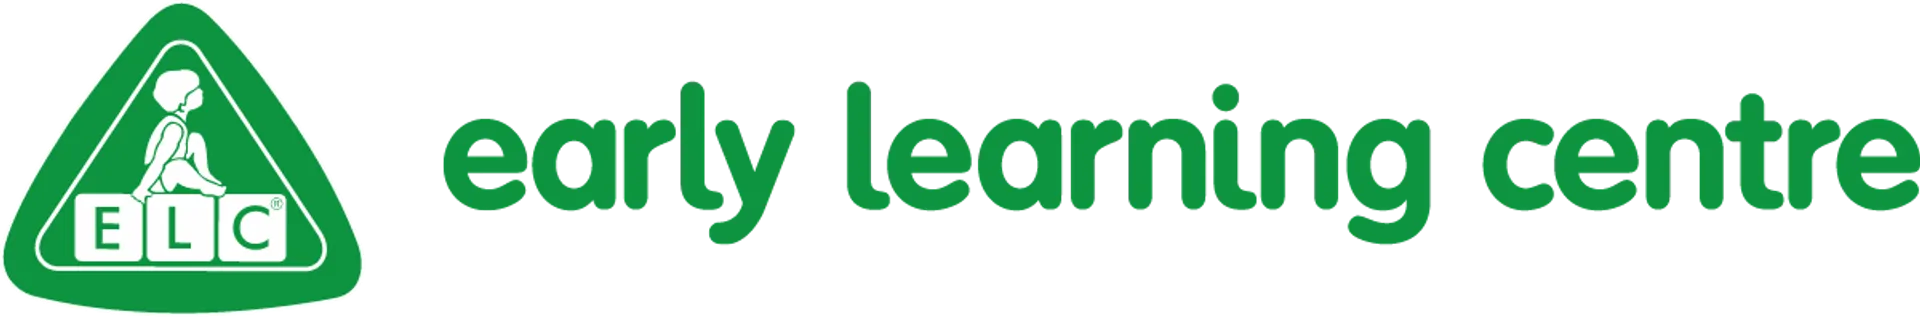 EARLY LEARNING CENTRE logo